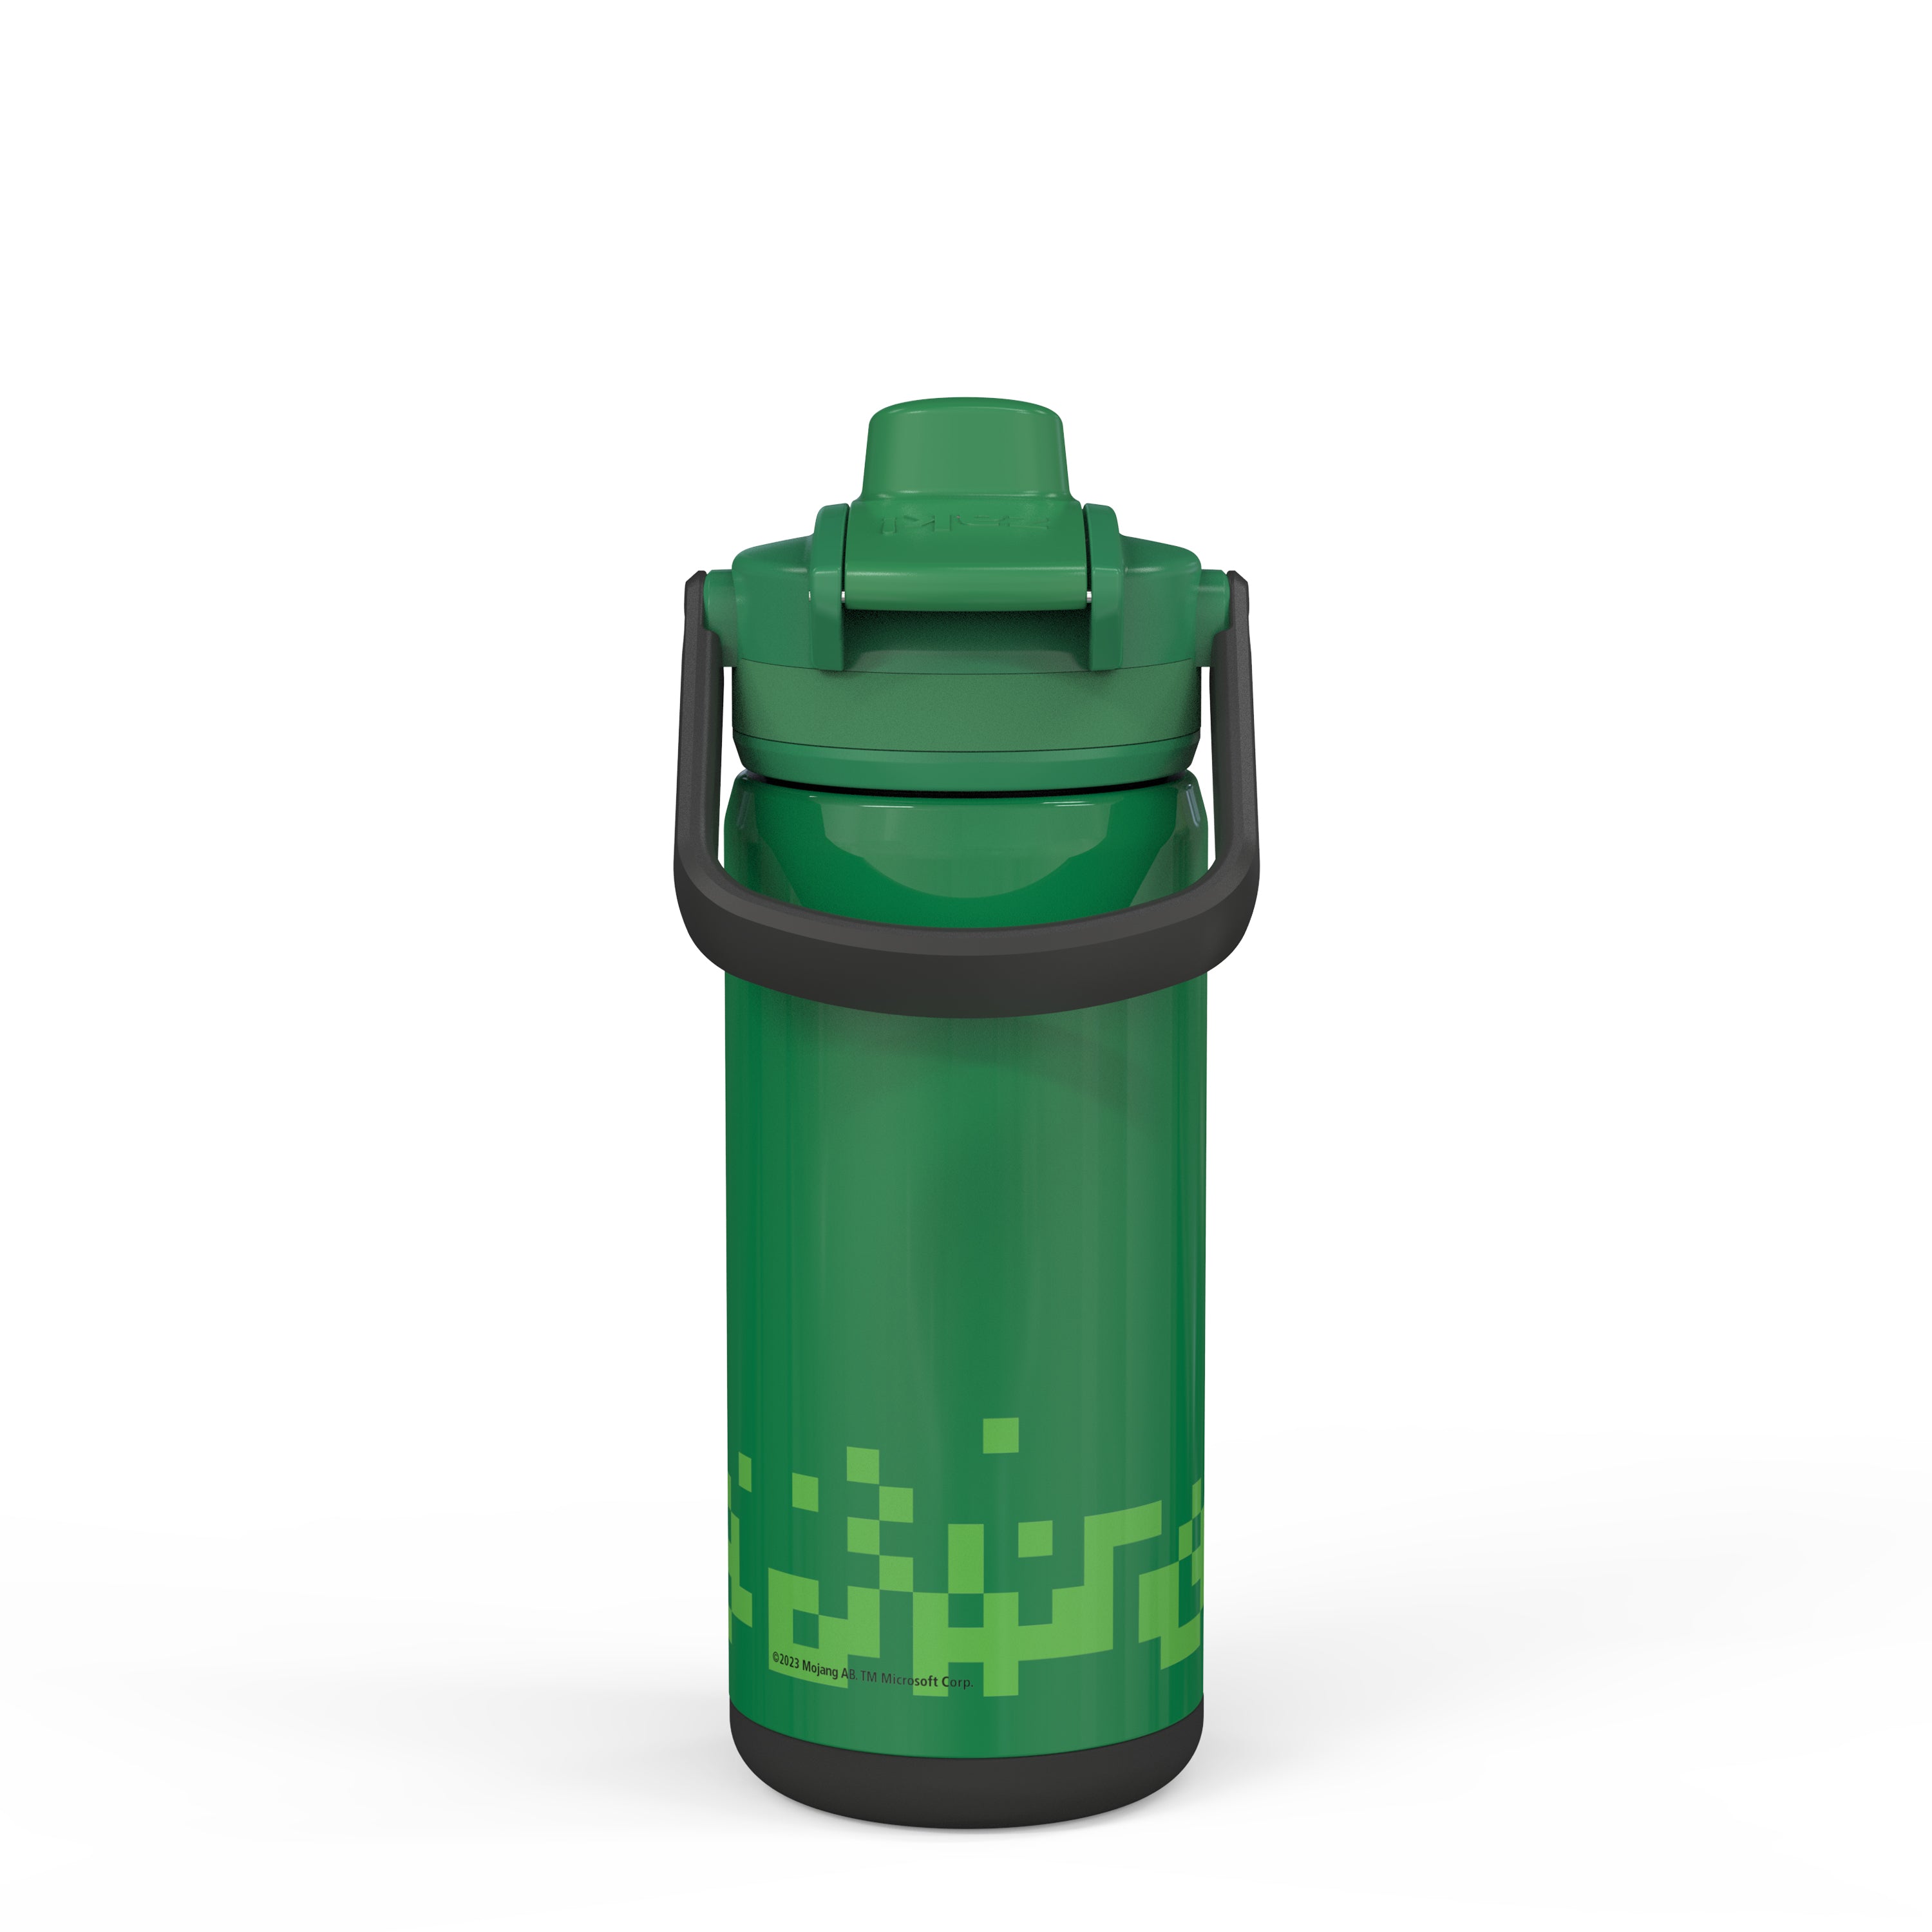 Minecraft Symbols All Over 27oz Stainless Water Steel Bottle